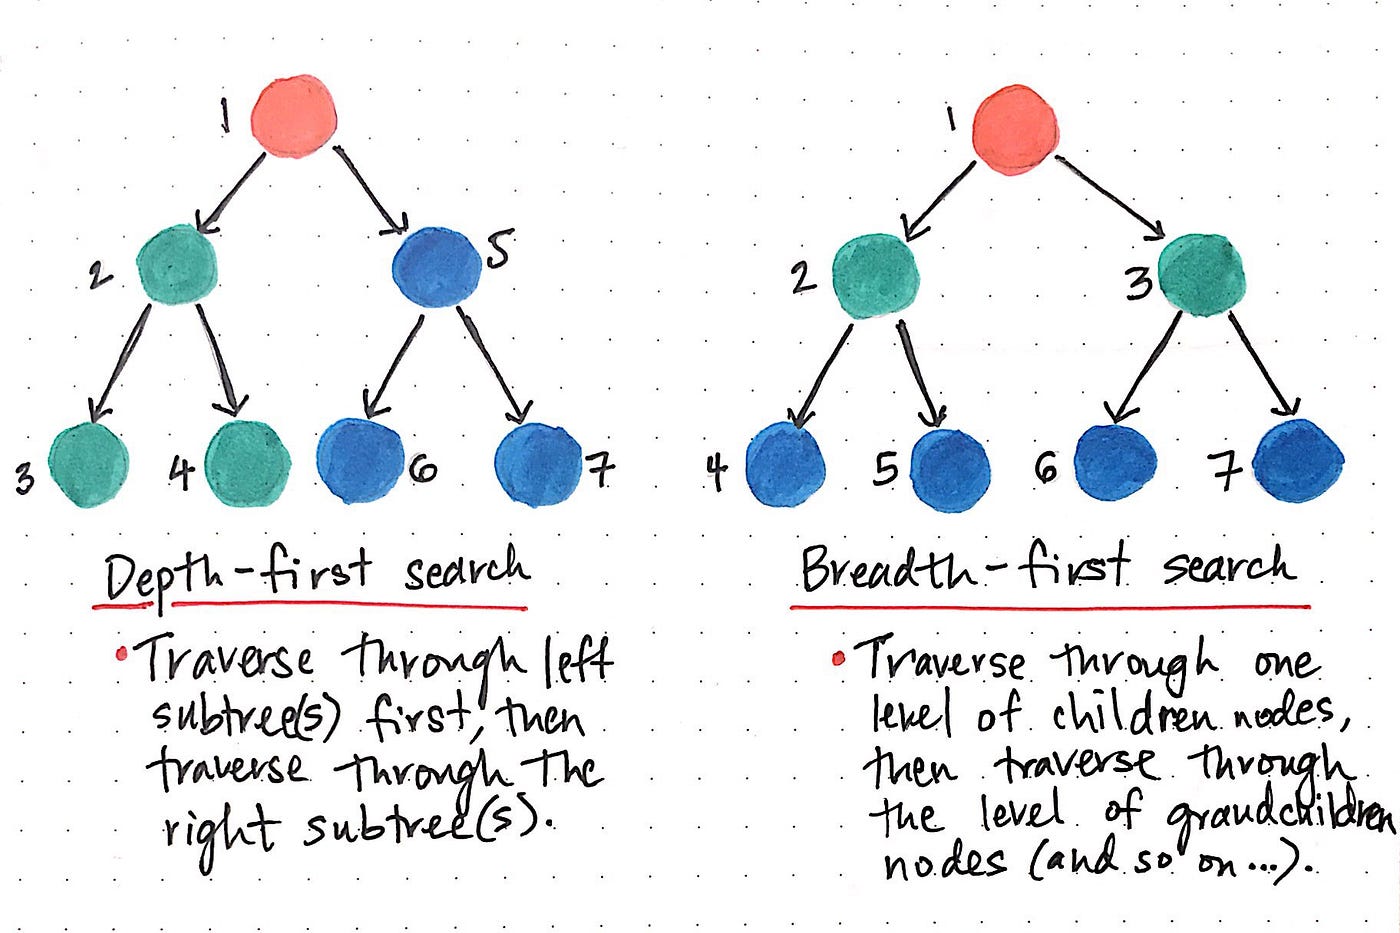 Breaking Down Breadth-First Search, by Vaidehi Joshi